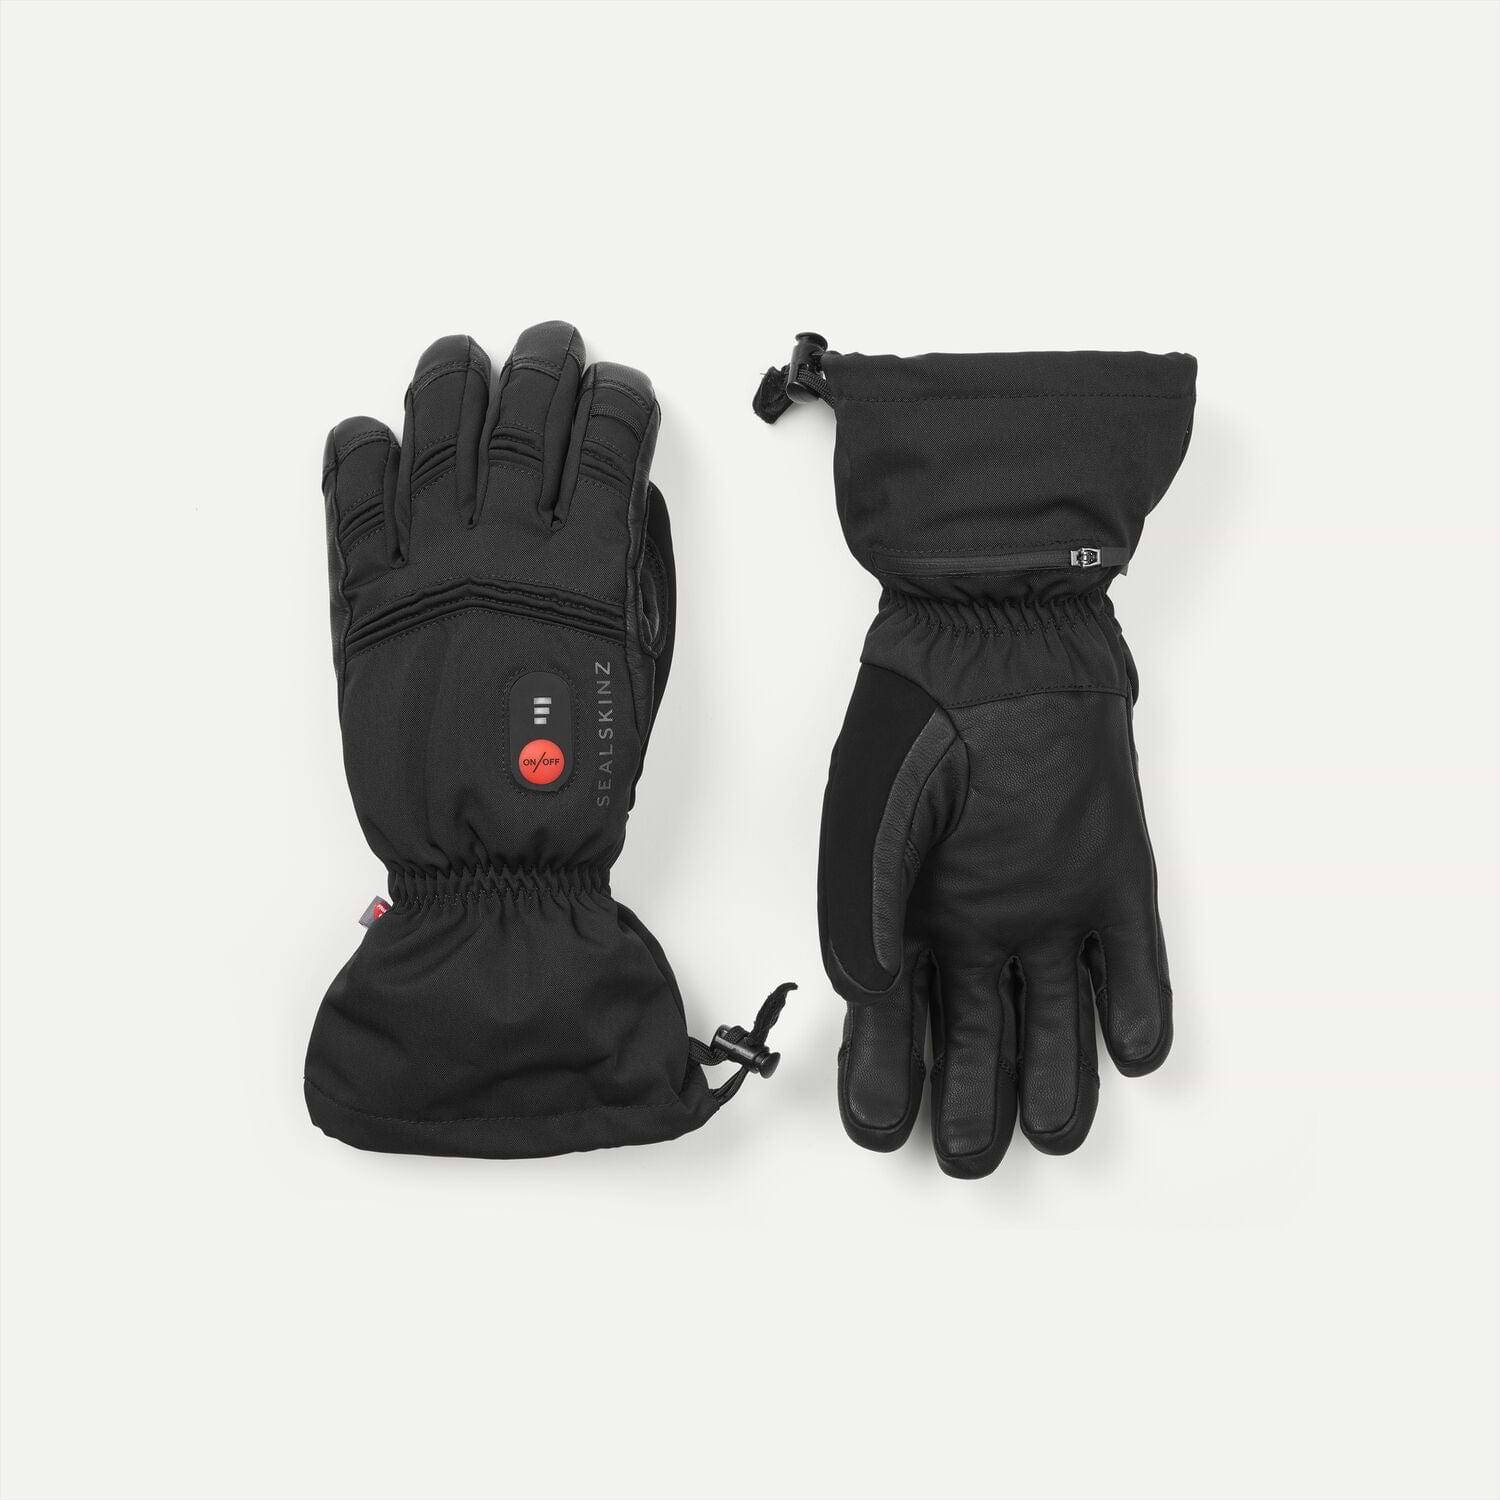 The Best Heated Gloves